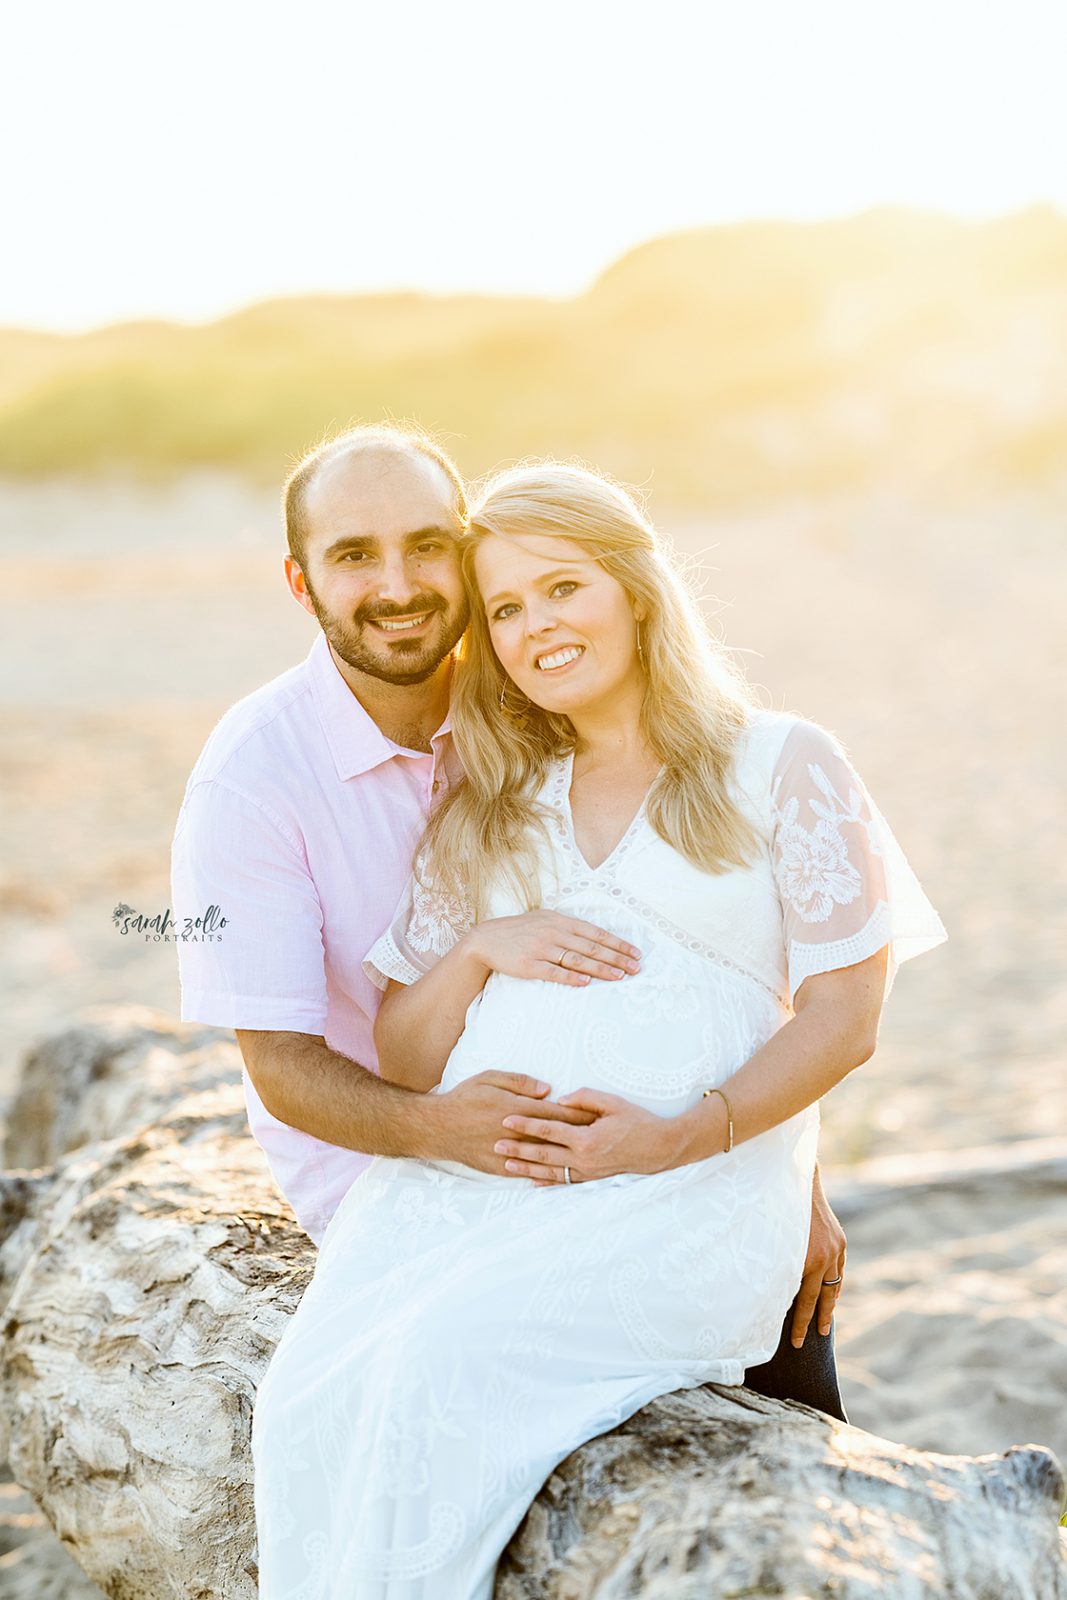 Maternity Photography and Beach Photo Session | Watch Hill, Napatree Point, Westerly, RI - Husband and wife on rock